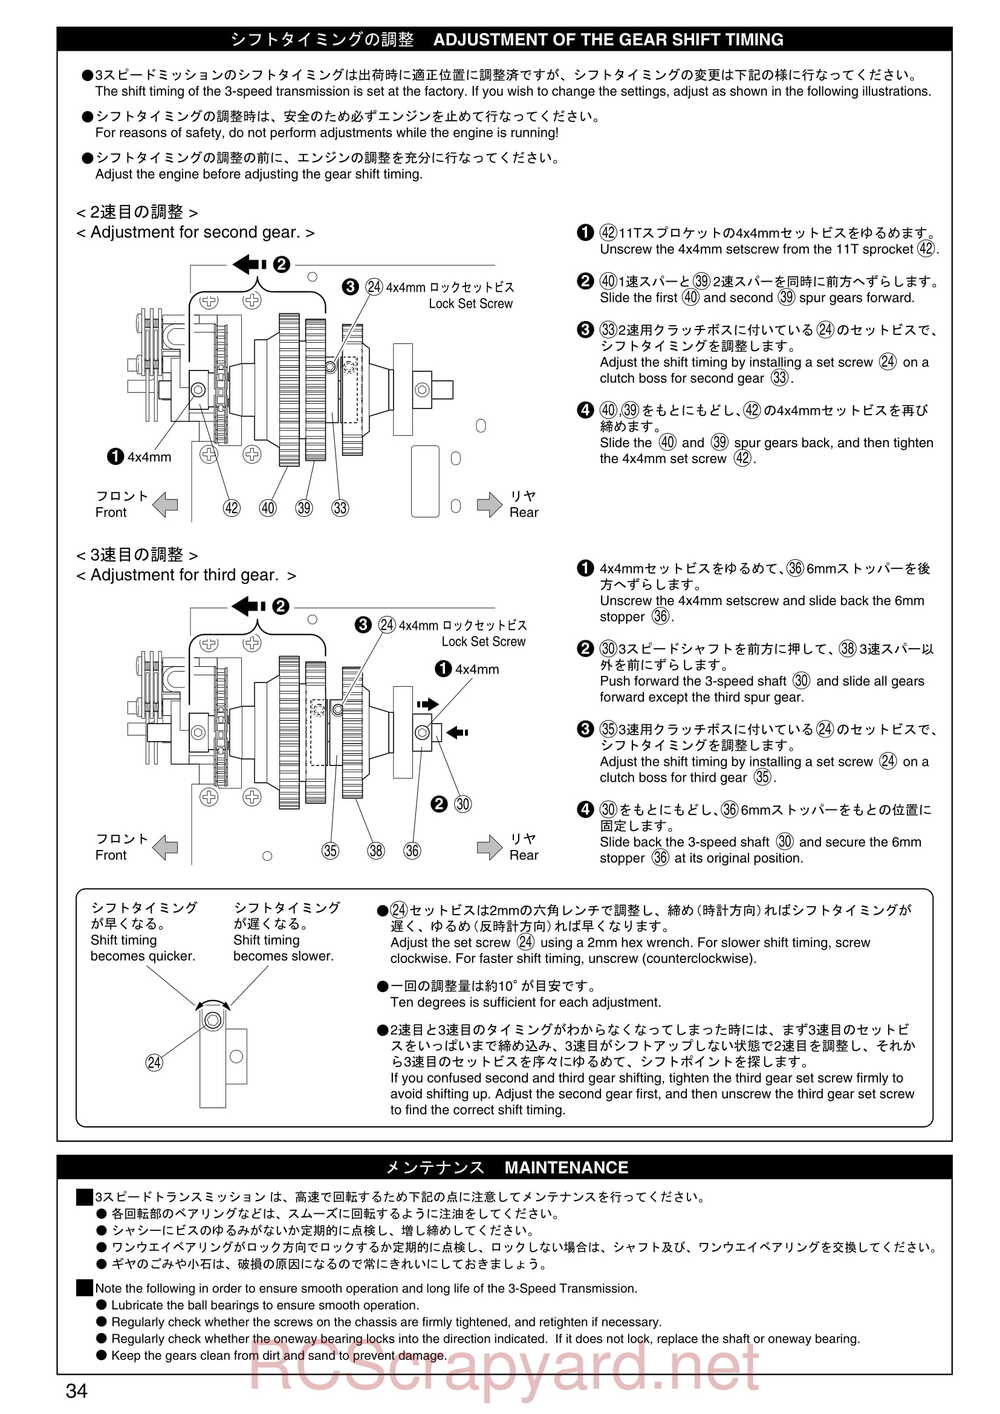 Kyosho - 31224 - Mad-Armour - Manual - Page 34